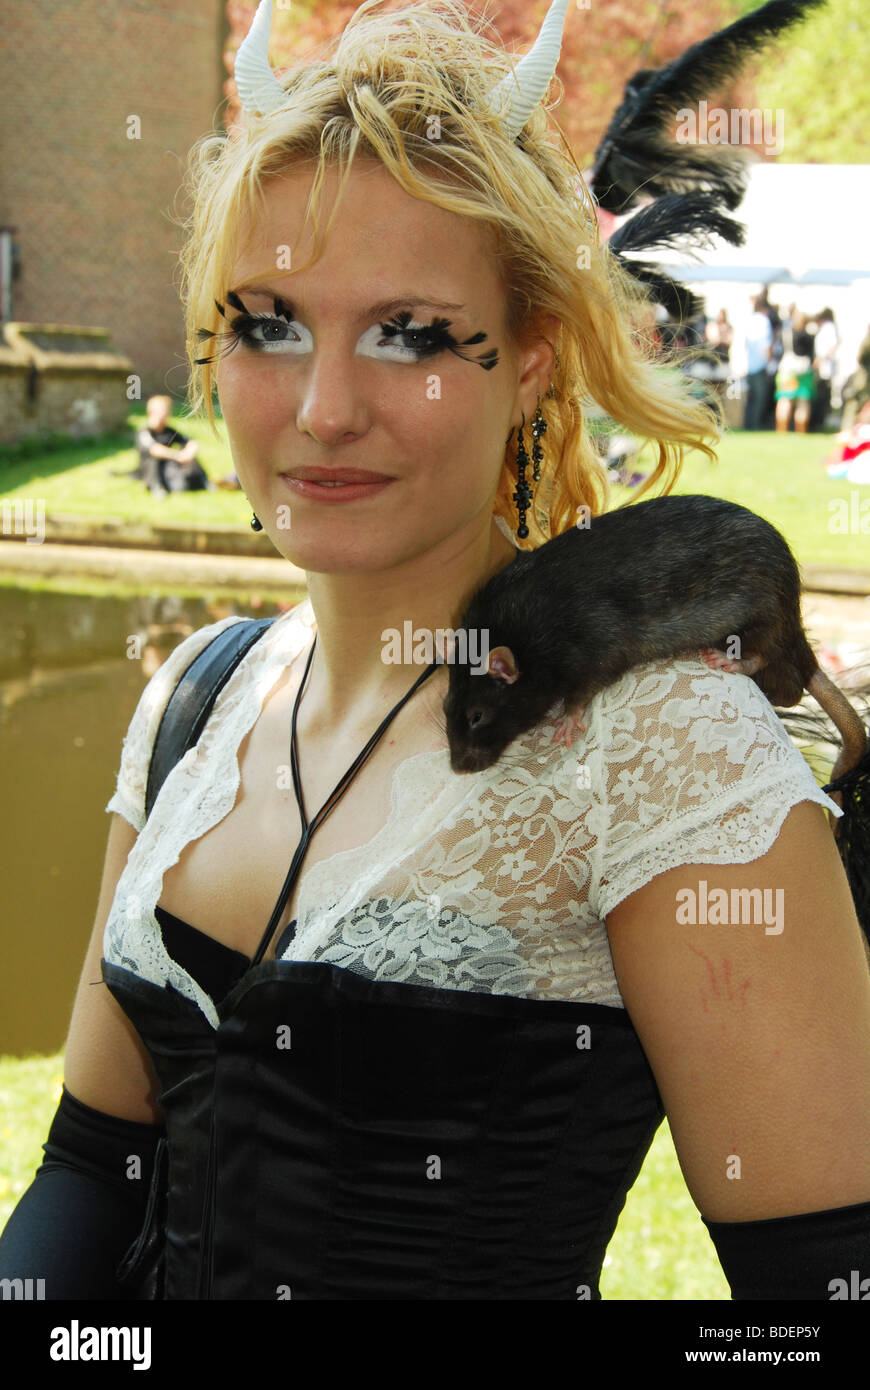 girl with rat posing at 2009 Fantasy Fair Haarzuilens Netherlands Europe Stock Photo